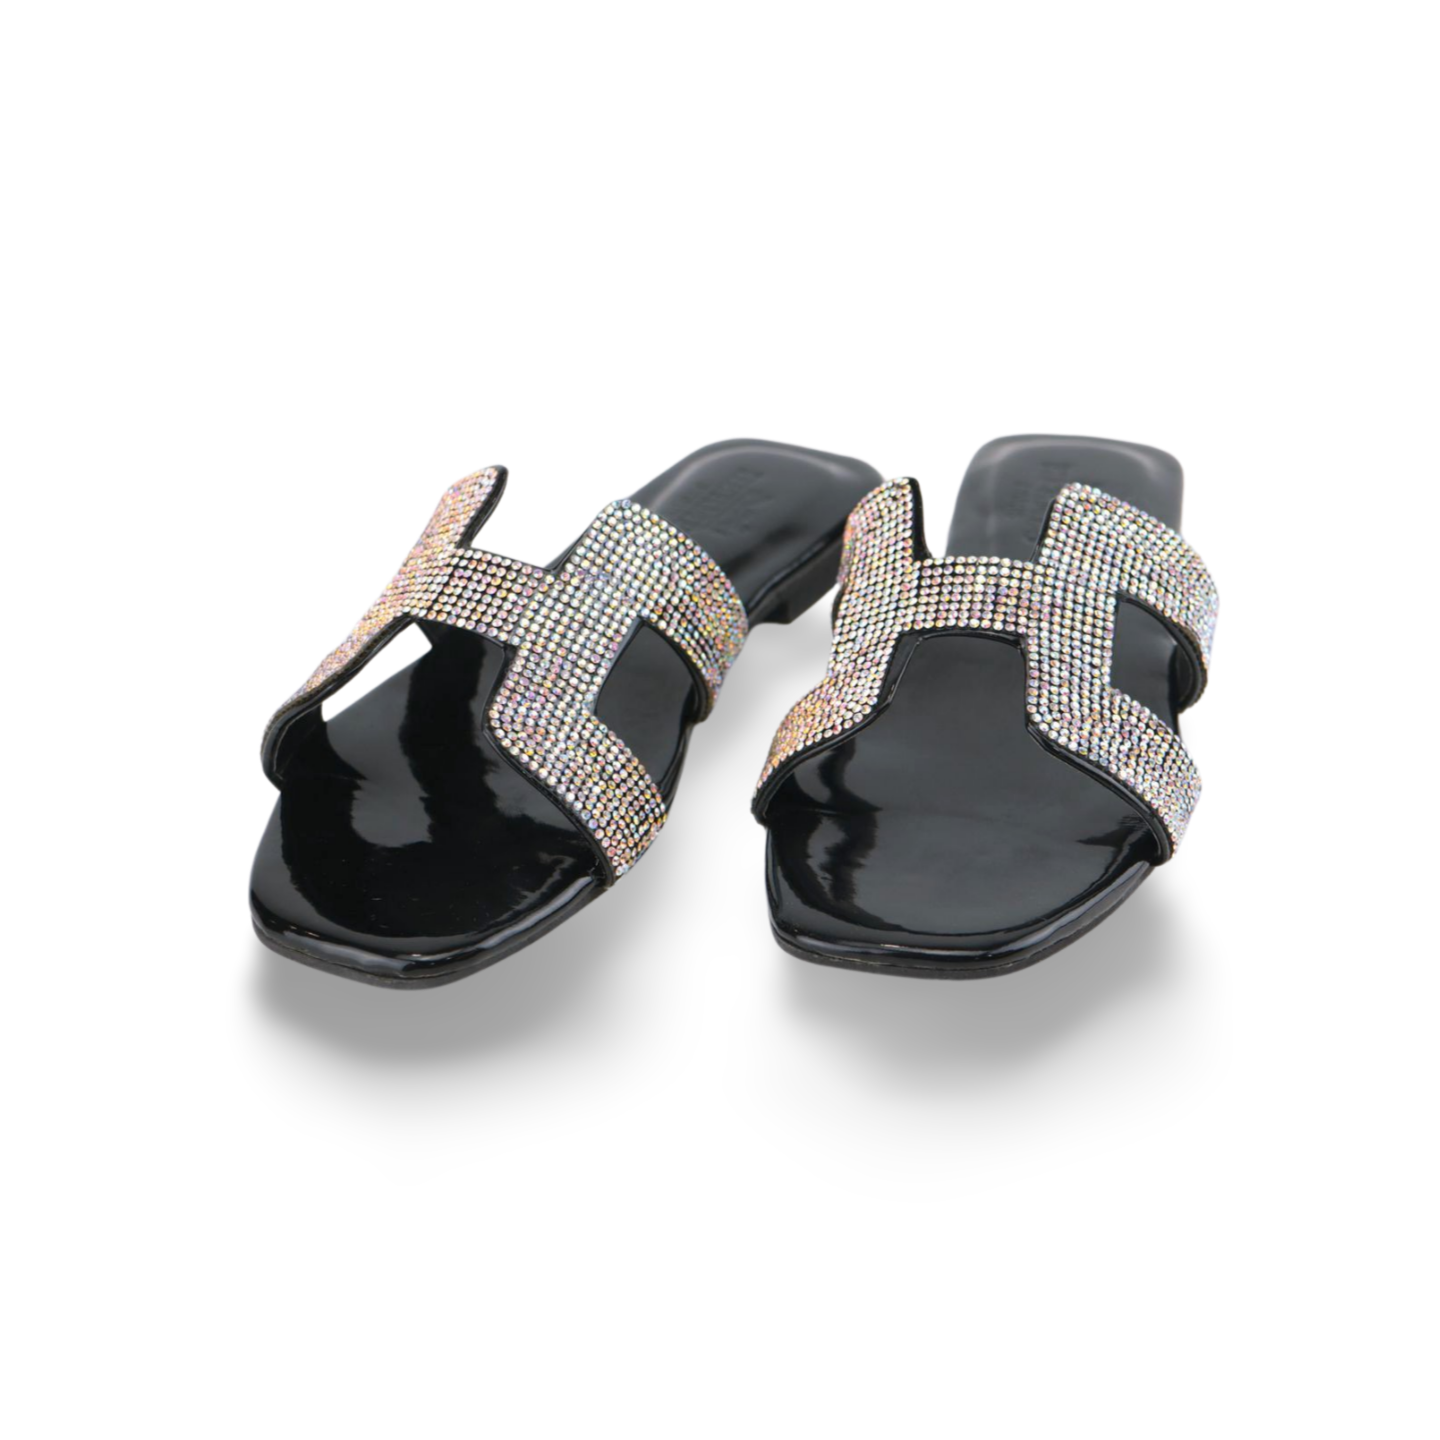 Iconic Style with a Dazzling Oran Sandals with Rhinestones